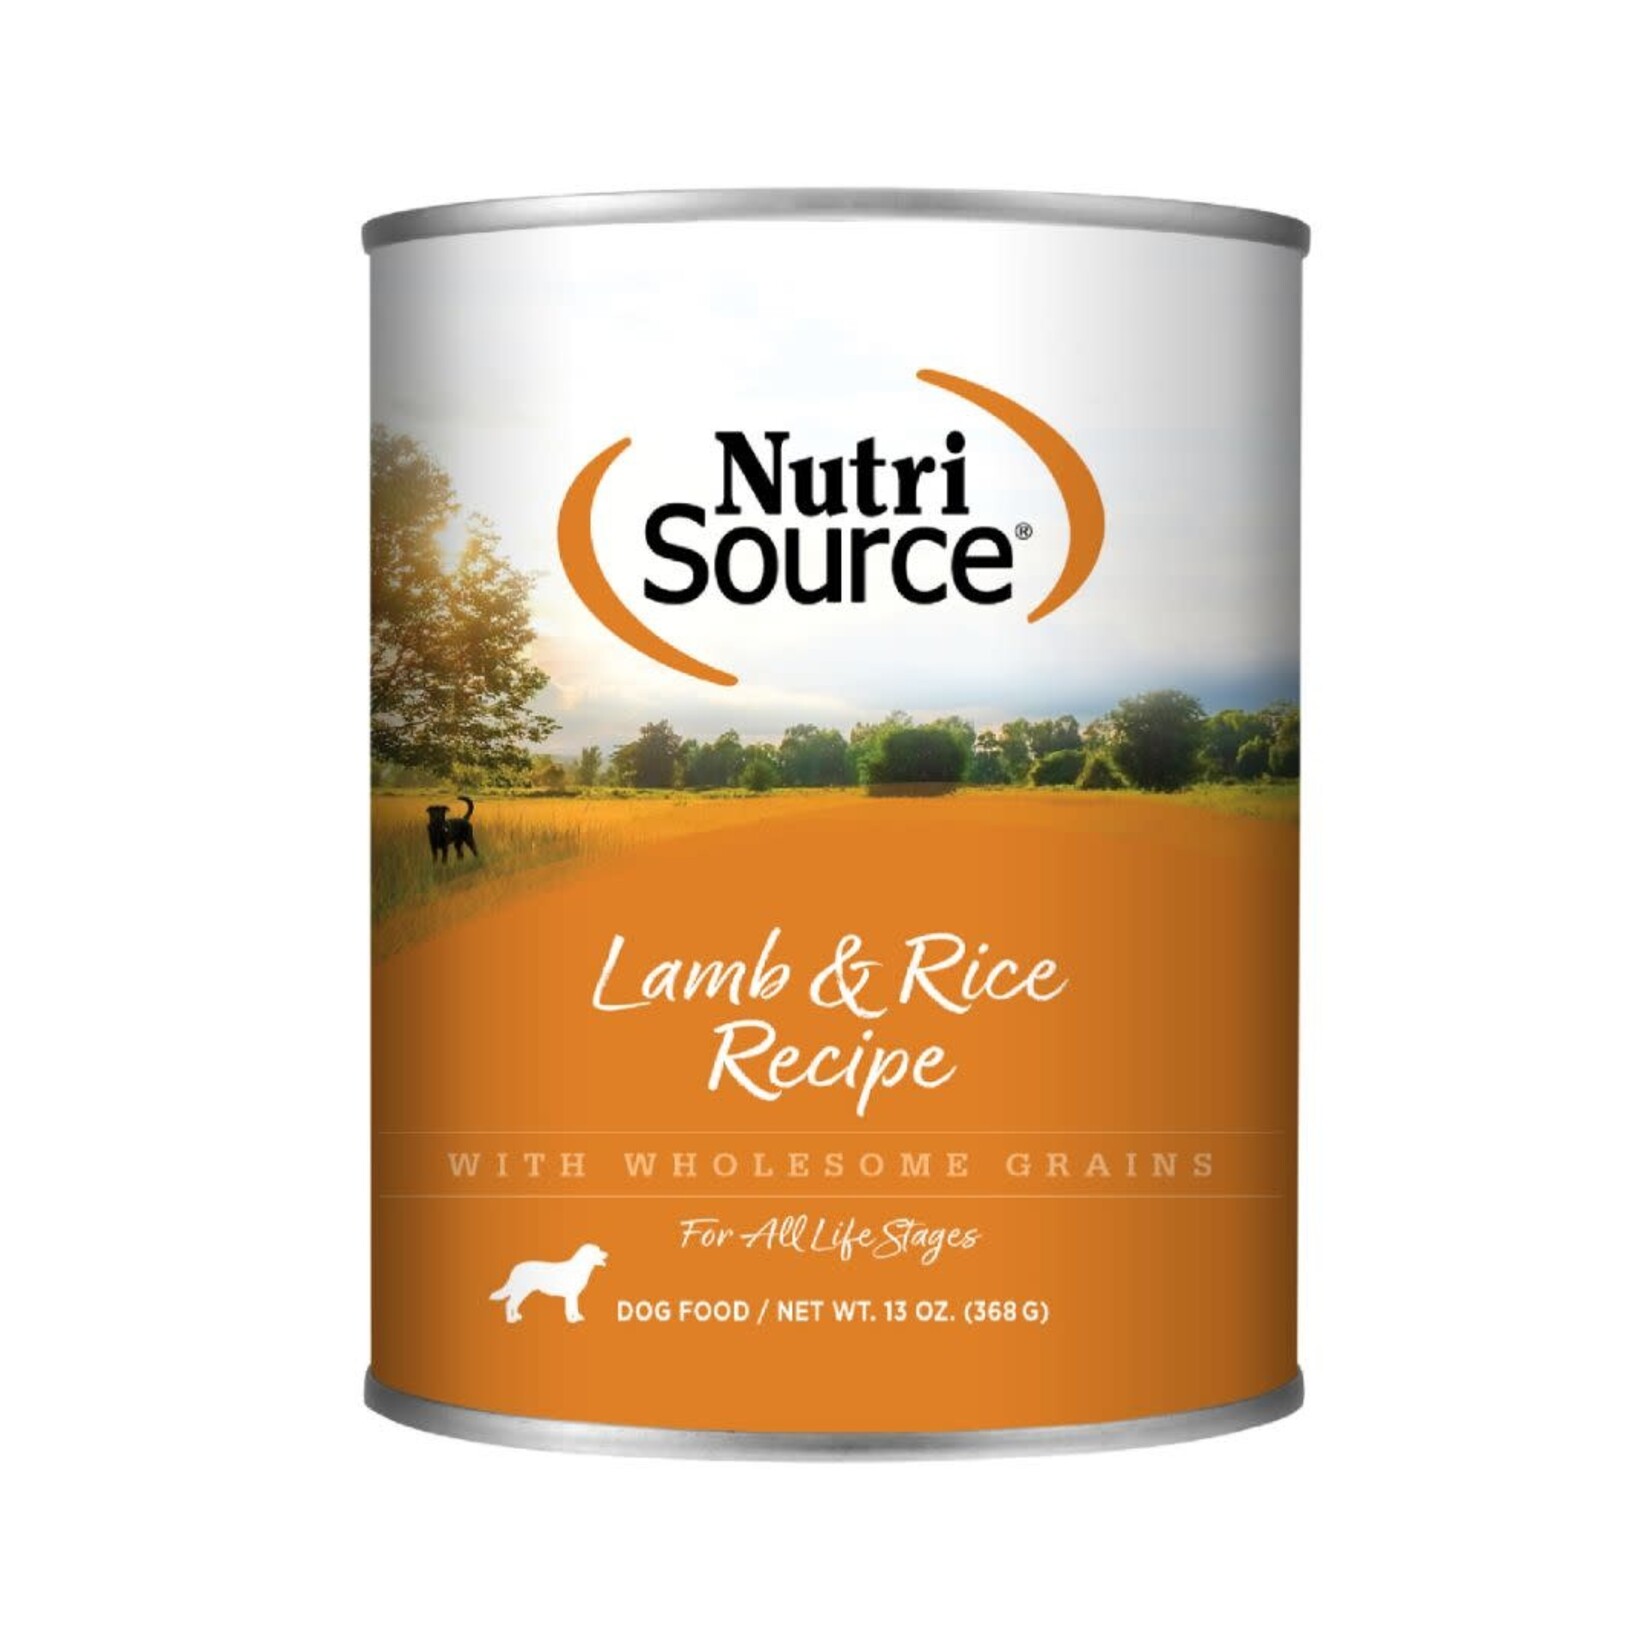 NutriSource NutriSource Lamb & Rice Recipe Canned Dog Food